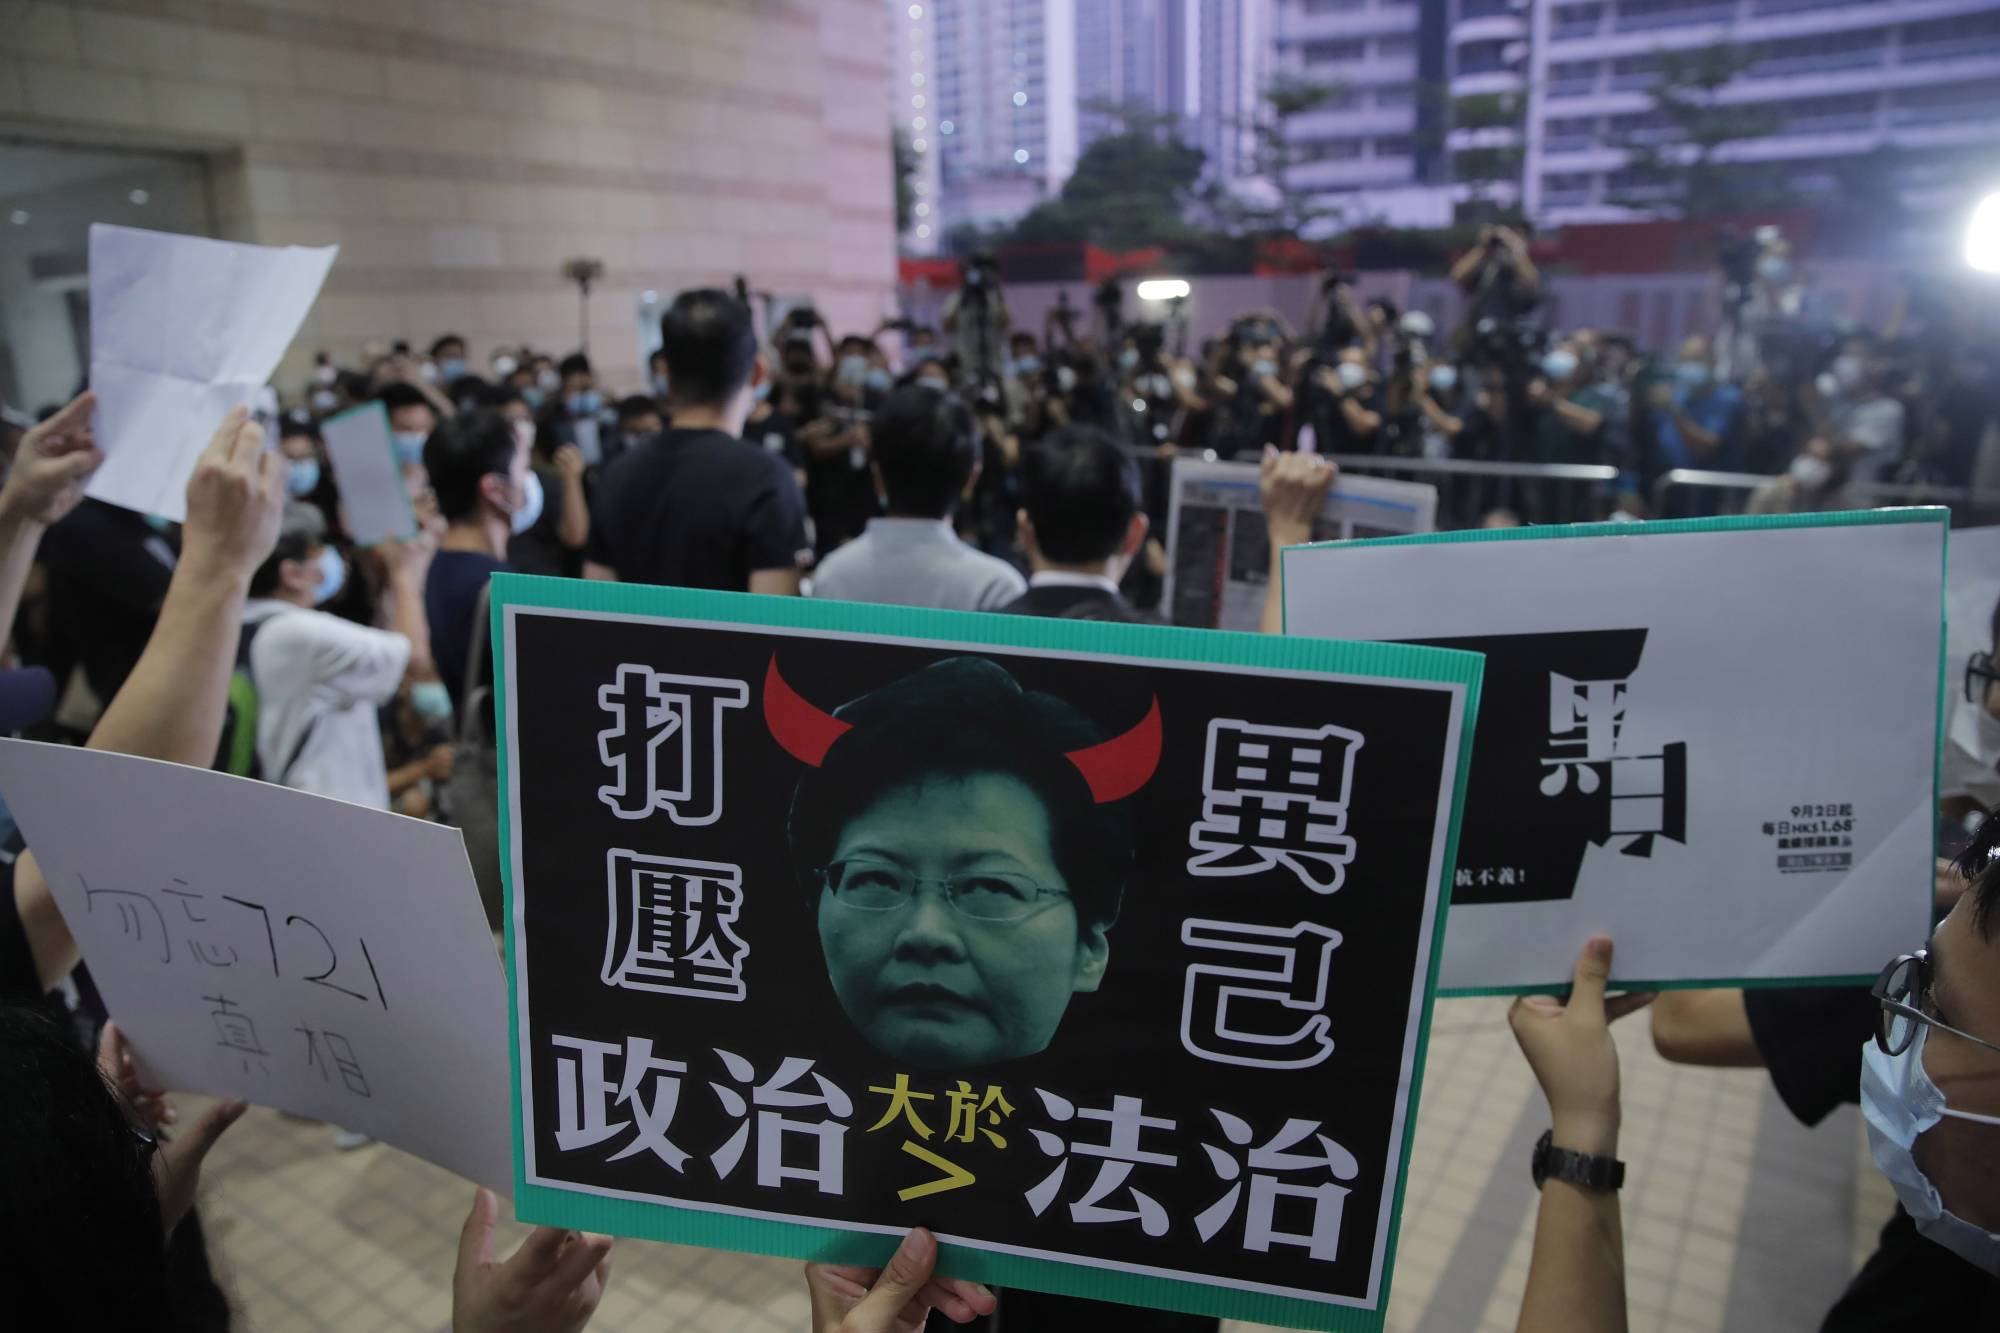 Pro-democracy protesters hold a placard featuring a picture of Hong Kong Chief Executive Carrie Lam as the pro-democracy legislators Ted Hui and Lam Cheuk-ting speak to media after being released on bail outside a court in Hong Kong on Thursday.  | AP